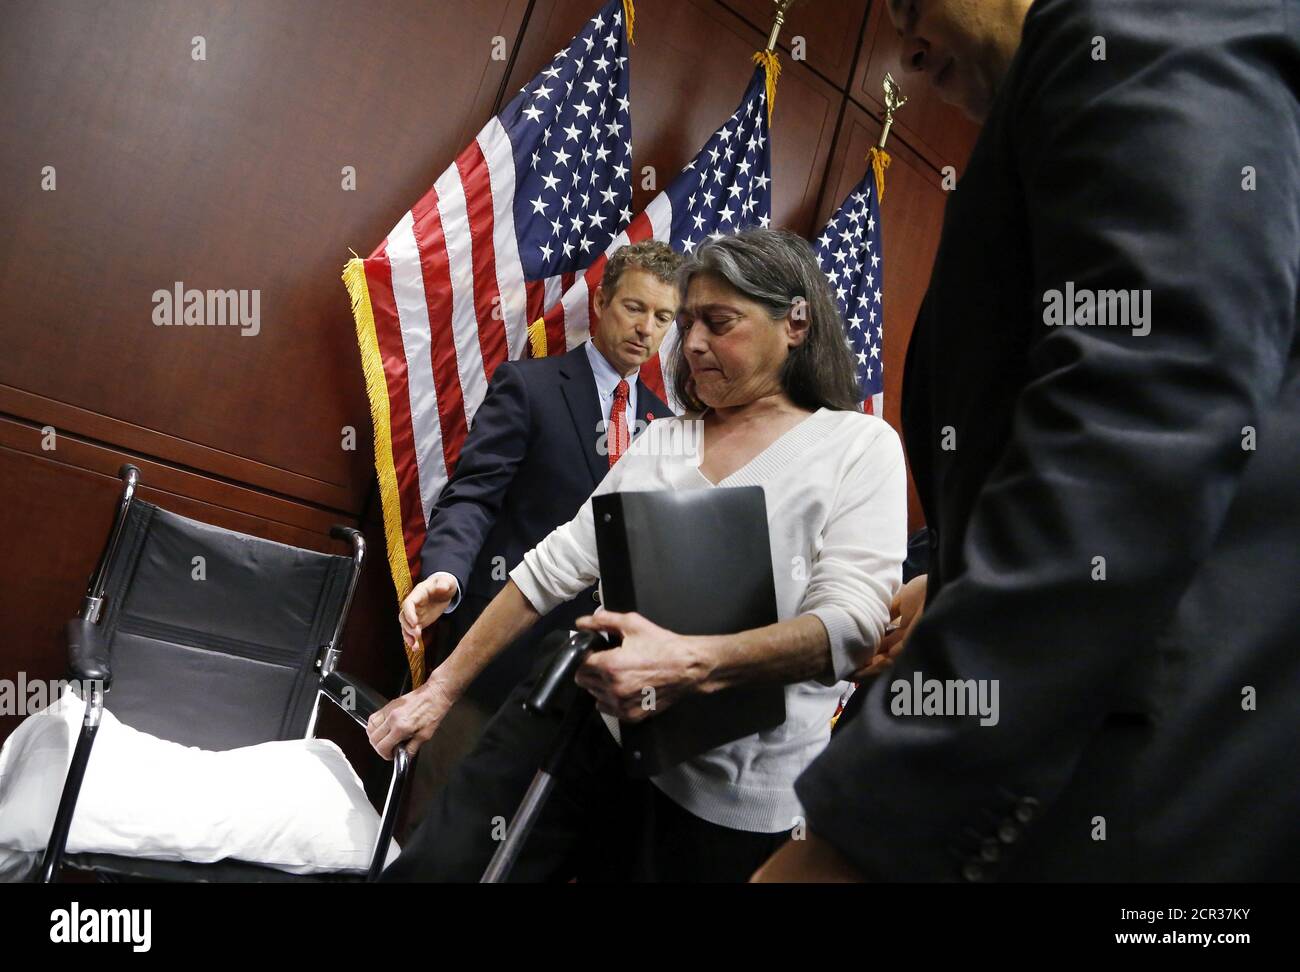 U.S. Senator Rand Paul (R-KY) (L) and Senator Cory Booker (D-NJ) (R) help Sandy Faiola, a medical marijuana patient from New Jersey, to her wheelchair at a news conference, to introduce legislation that would prevent the federal government from prosecuting medical marijuana users in states where it is legal, at the U.S. Capitol in Washington, March 10, 2015. REUTERS/Jonathan Ernst    (UNITED STATES - Tags: POLITICS HEALTH SOCIETY) Stock Photo